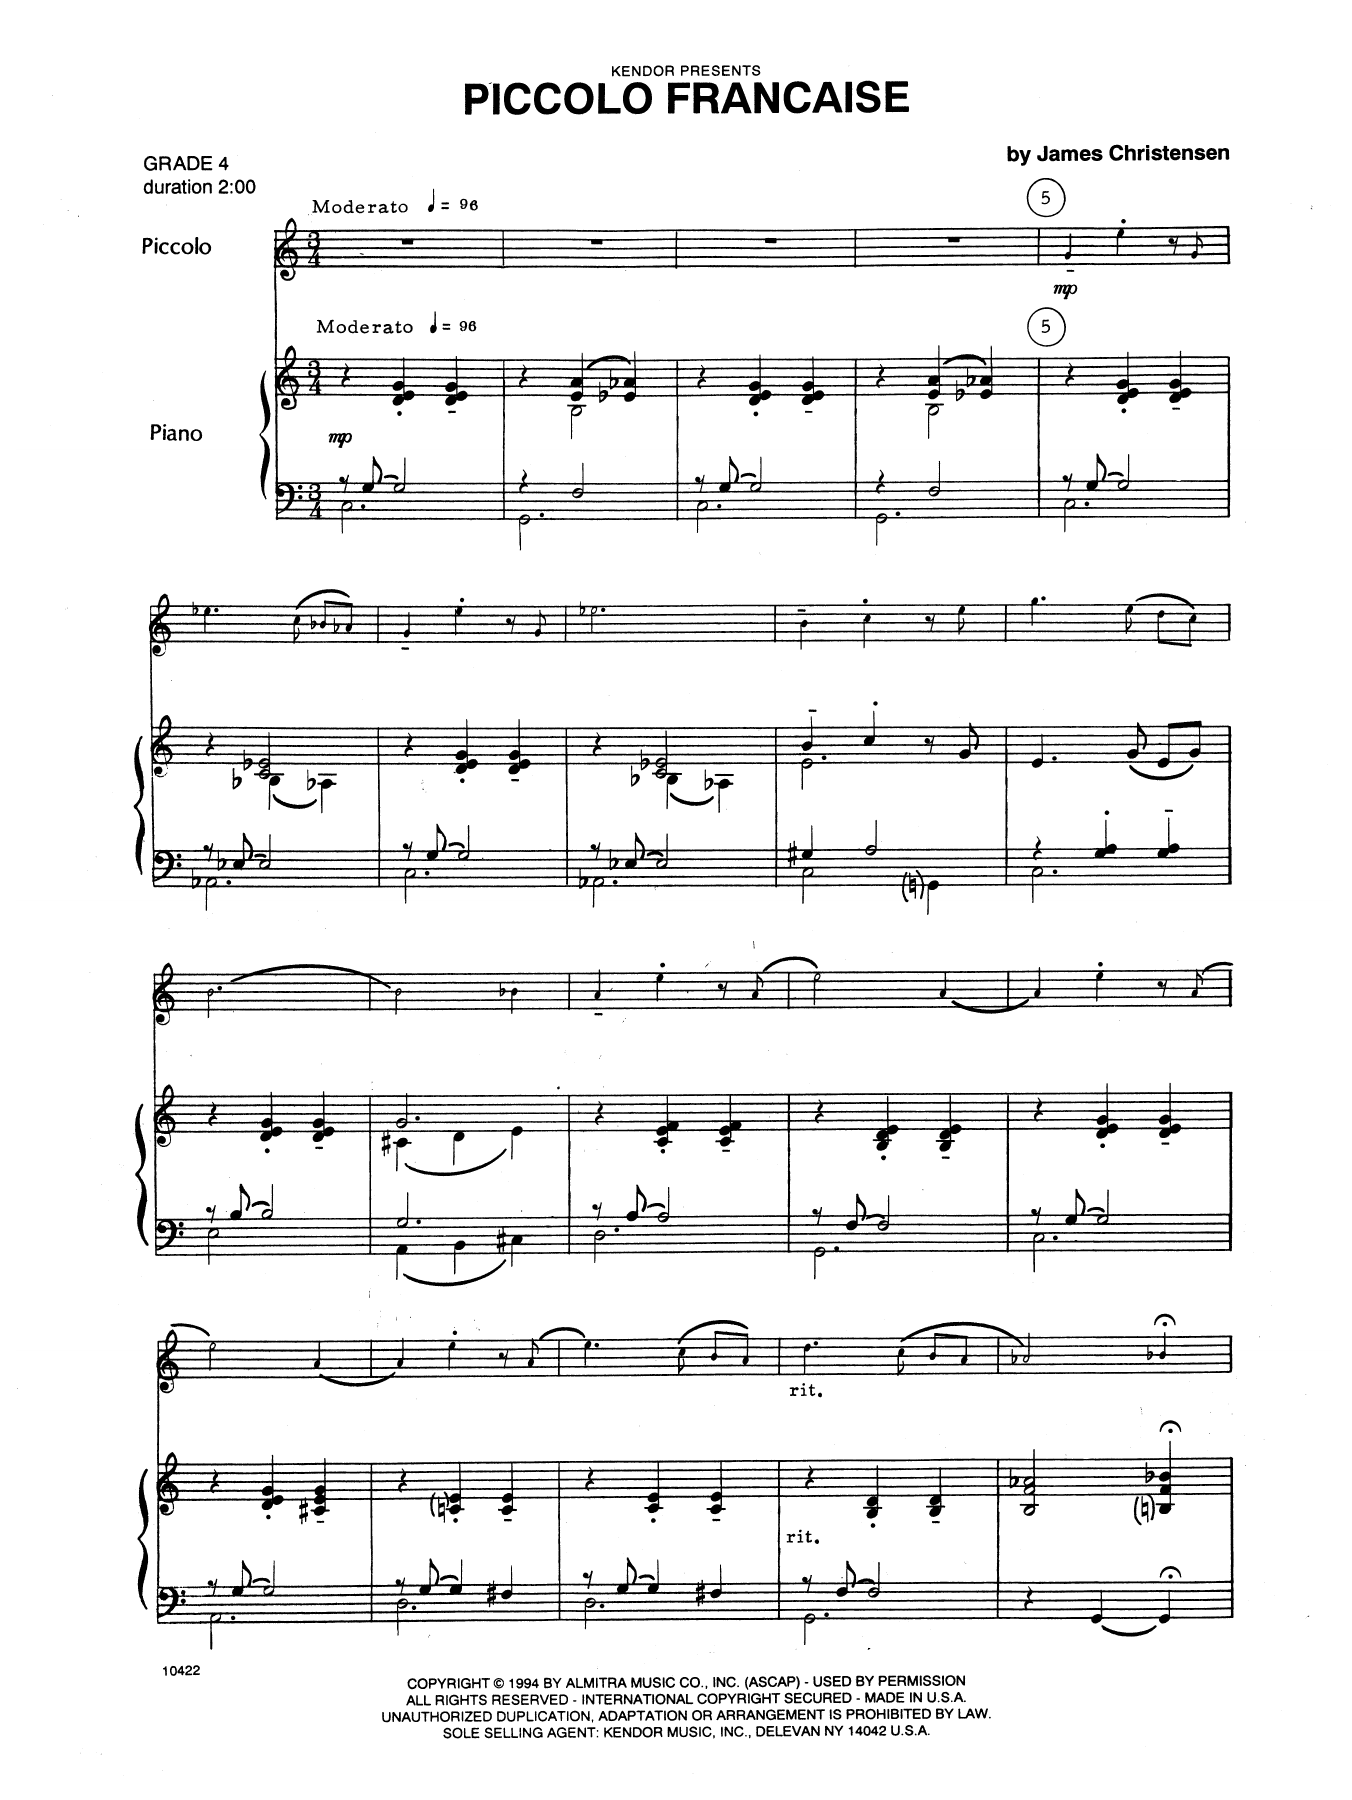 Download James Christensen Piccolo Francaise - Piano (optional) Sheet Music